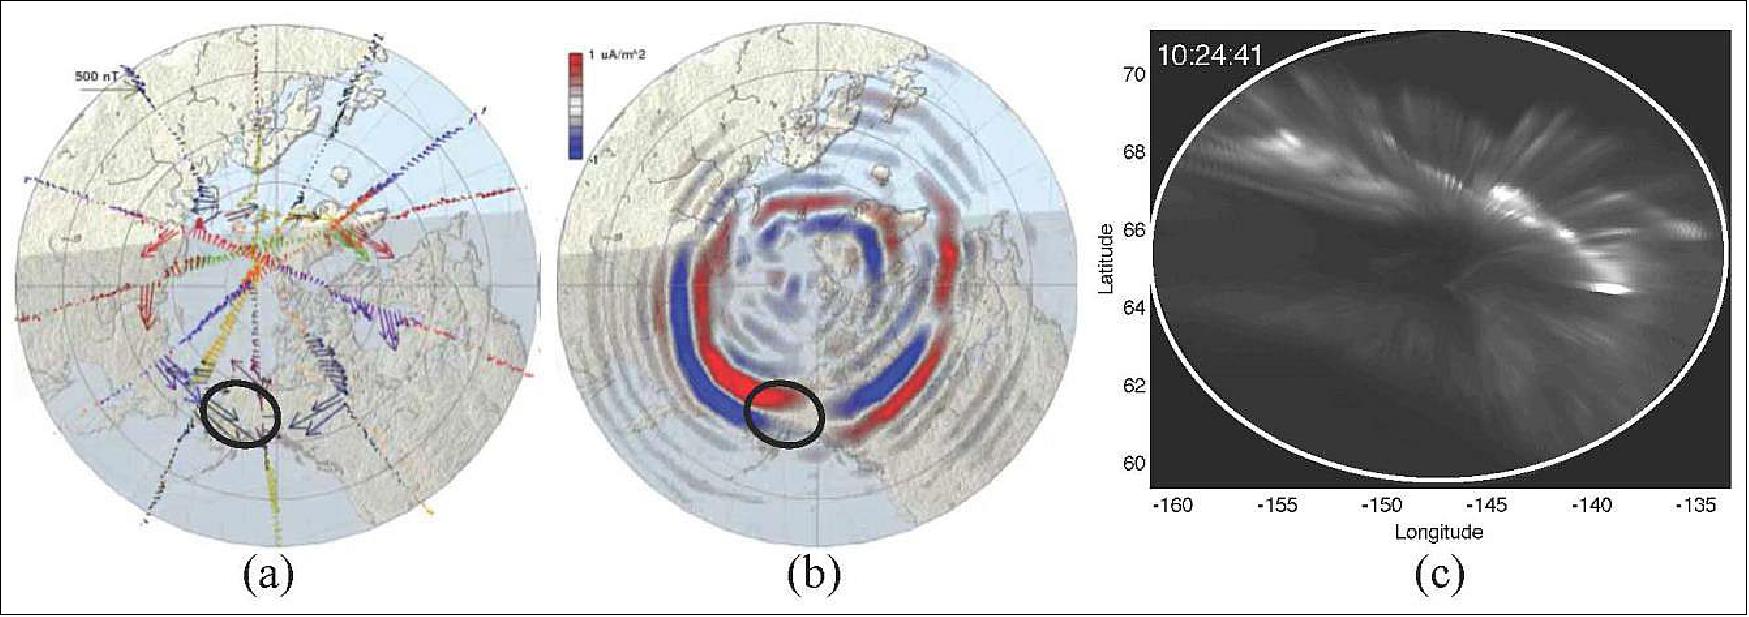 Figure 2: (a) “Snapshot” of magnetic deflections measured by the Iridium satellite constellation during a substorm onset over the west coast of Alaska at ~10:20 UT on 01 March 2011. The inset circle depicts the field of view of the Poker Flat, AK, auroral all-sky camera. (b) Field-aligned current pattern derived from the first panel. (c) All-sky camera image recorded during the substorm expansion shown in the first panels. The image has been projected to map coordinates assuming an auroral emission altitude of 120 km. The camera field of view is depicted by the oval in panels (a) and (b). Note the prevalence of coherent kilometer-scale structures in the image, highlighting the elemental scales of energy dissipation (image credit: L. B. N. Clausen, et al.)